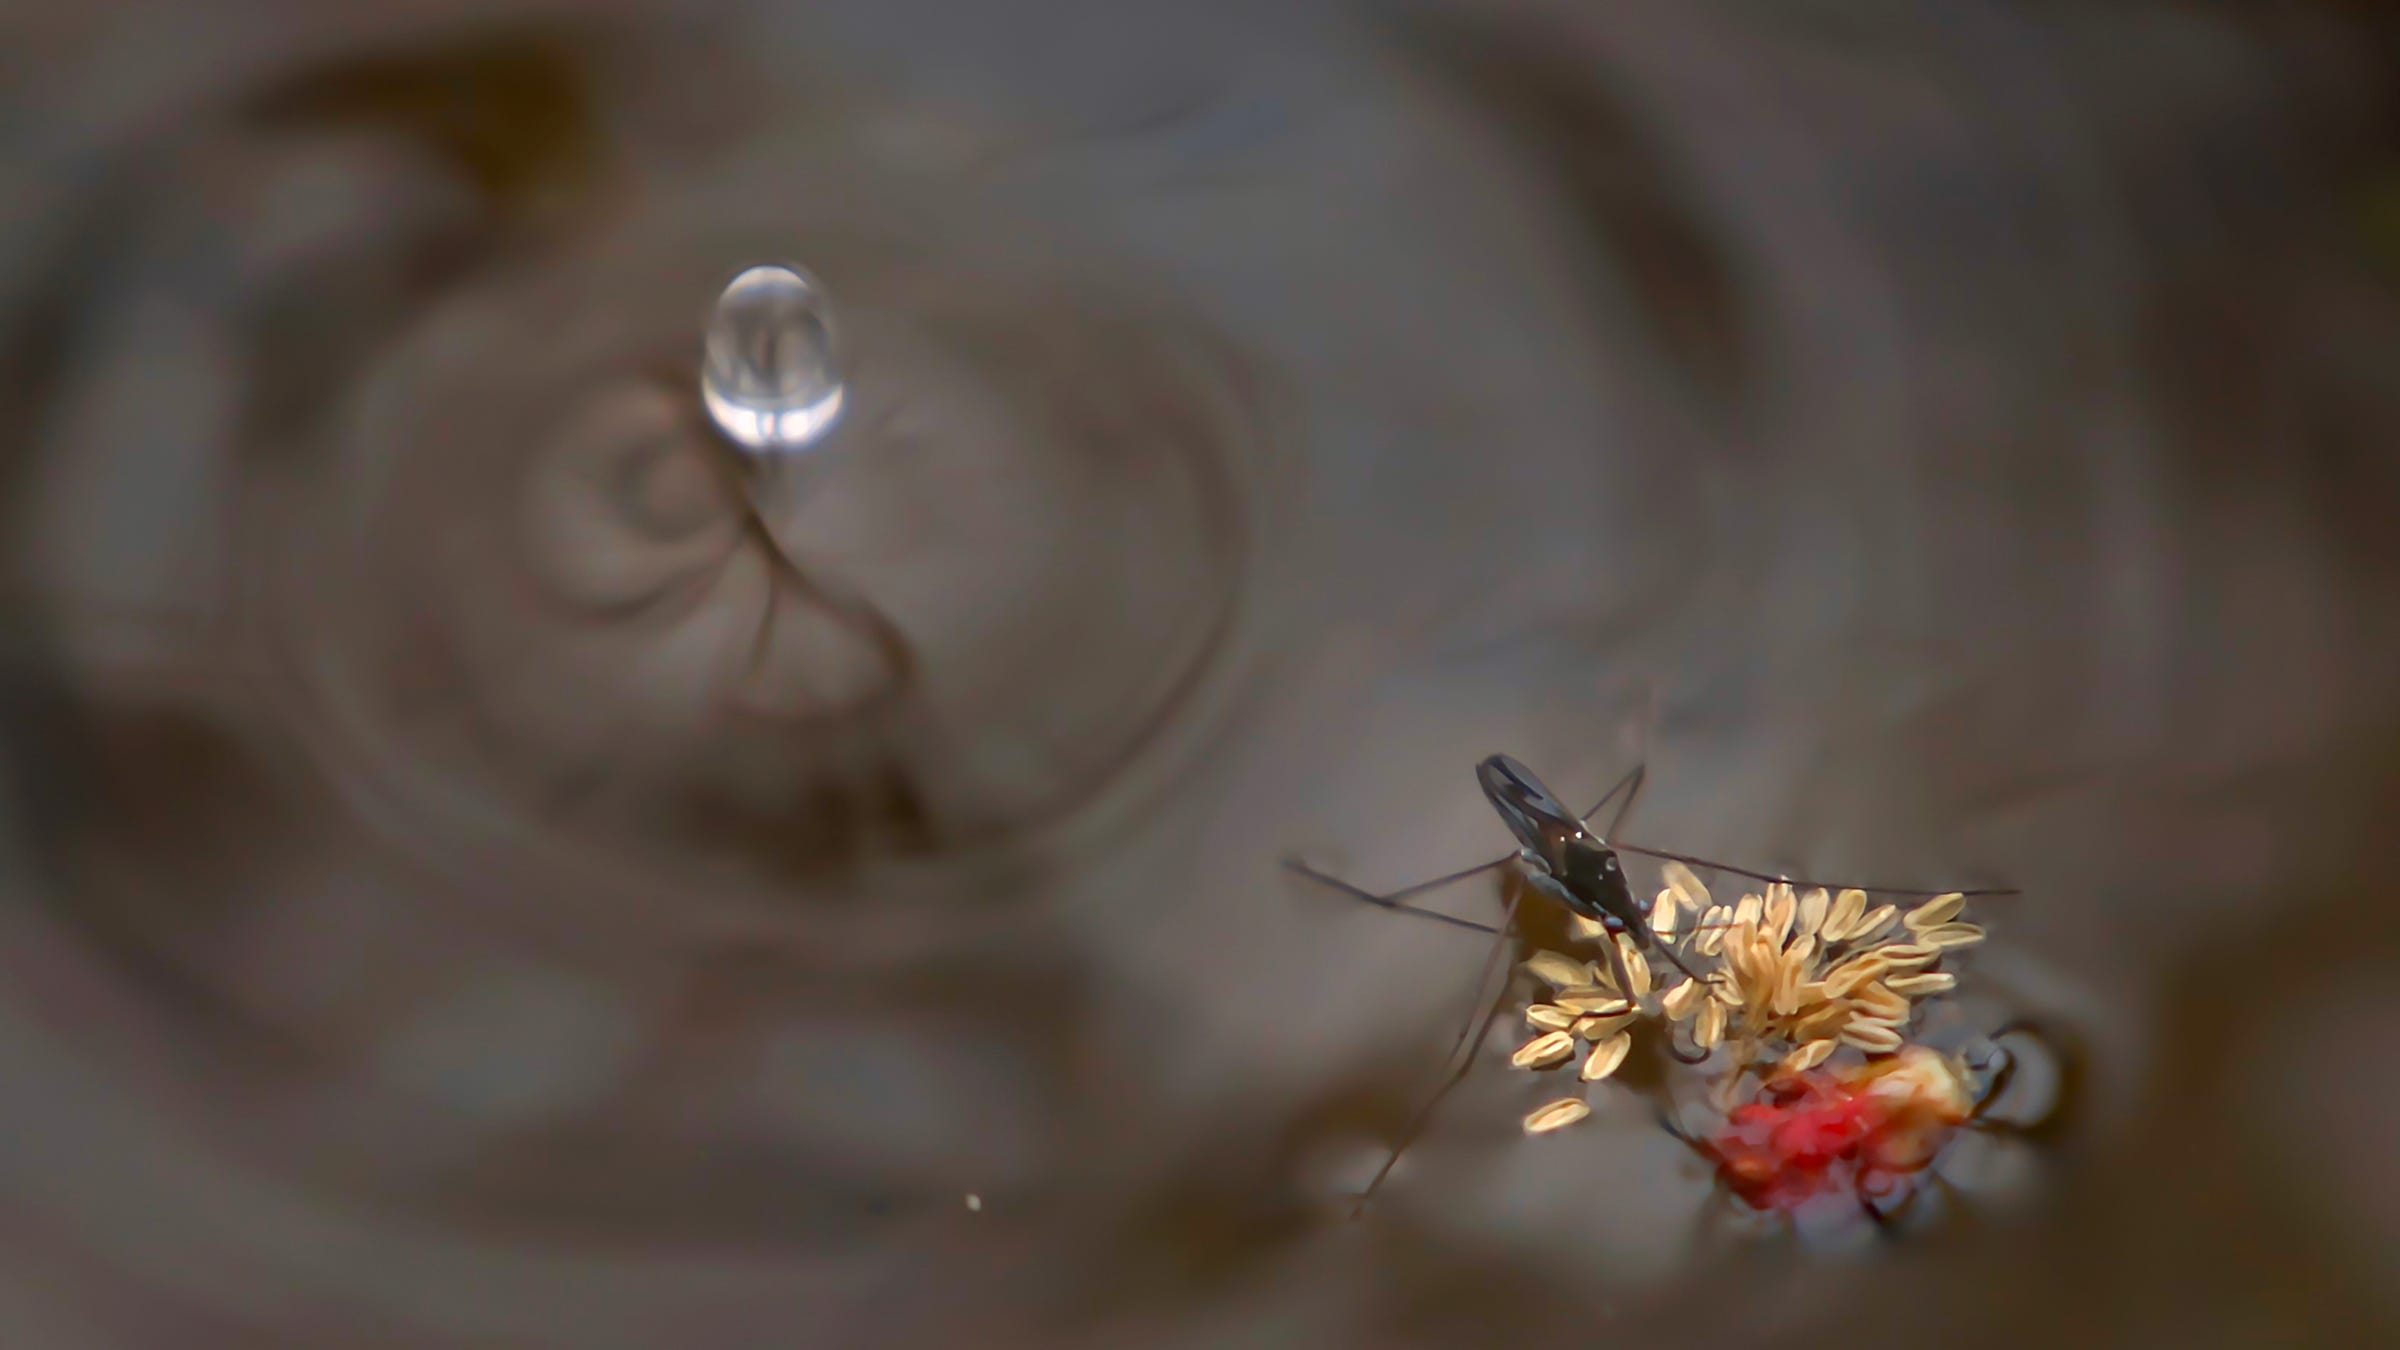 A water strider clings to plant matter during a rainstorm at Bald Mountain Recreation Area in southeastern Michigan on Wednesday, April 29, 2020. The state land in Oakland County features inland lakes and forested, rolling hills.